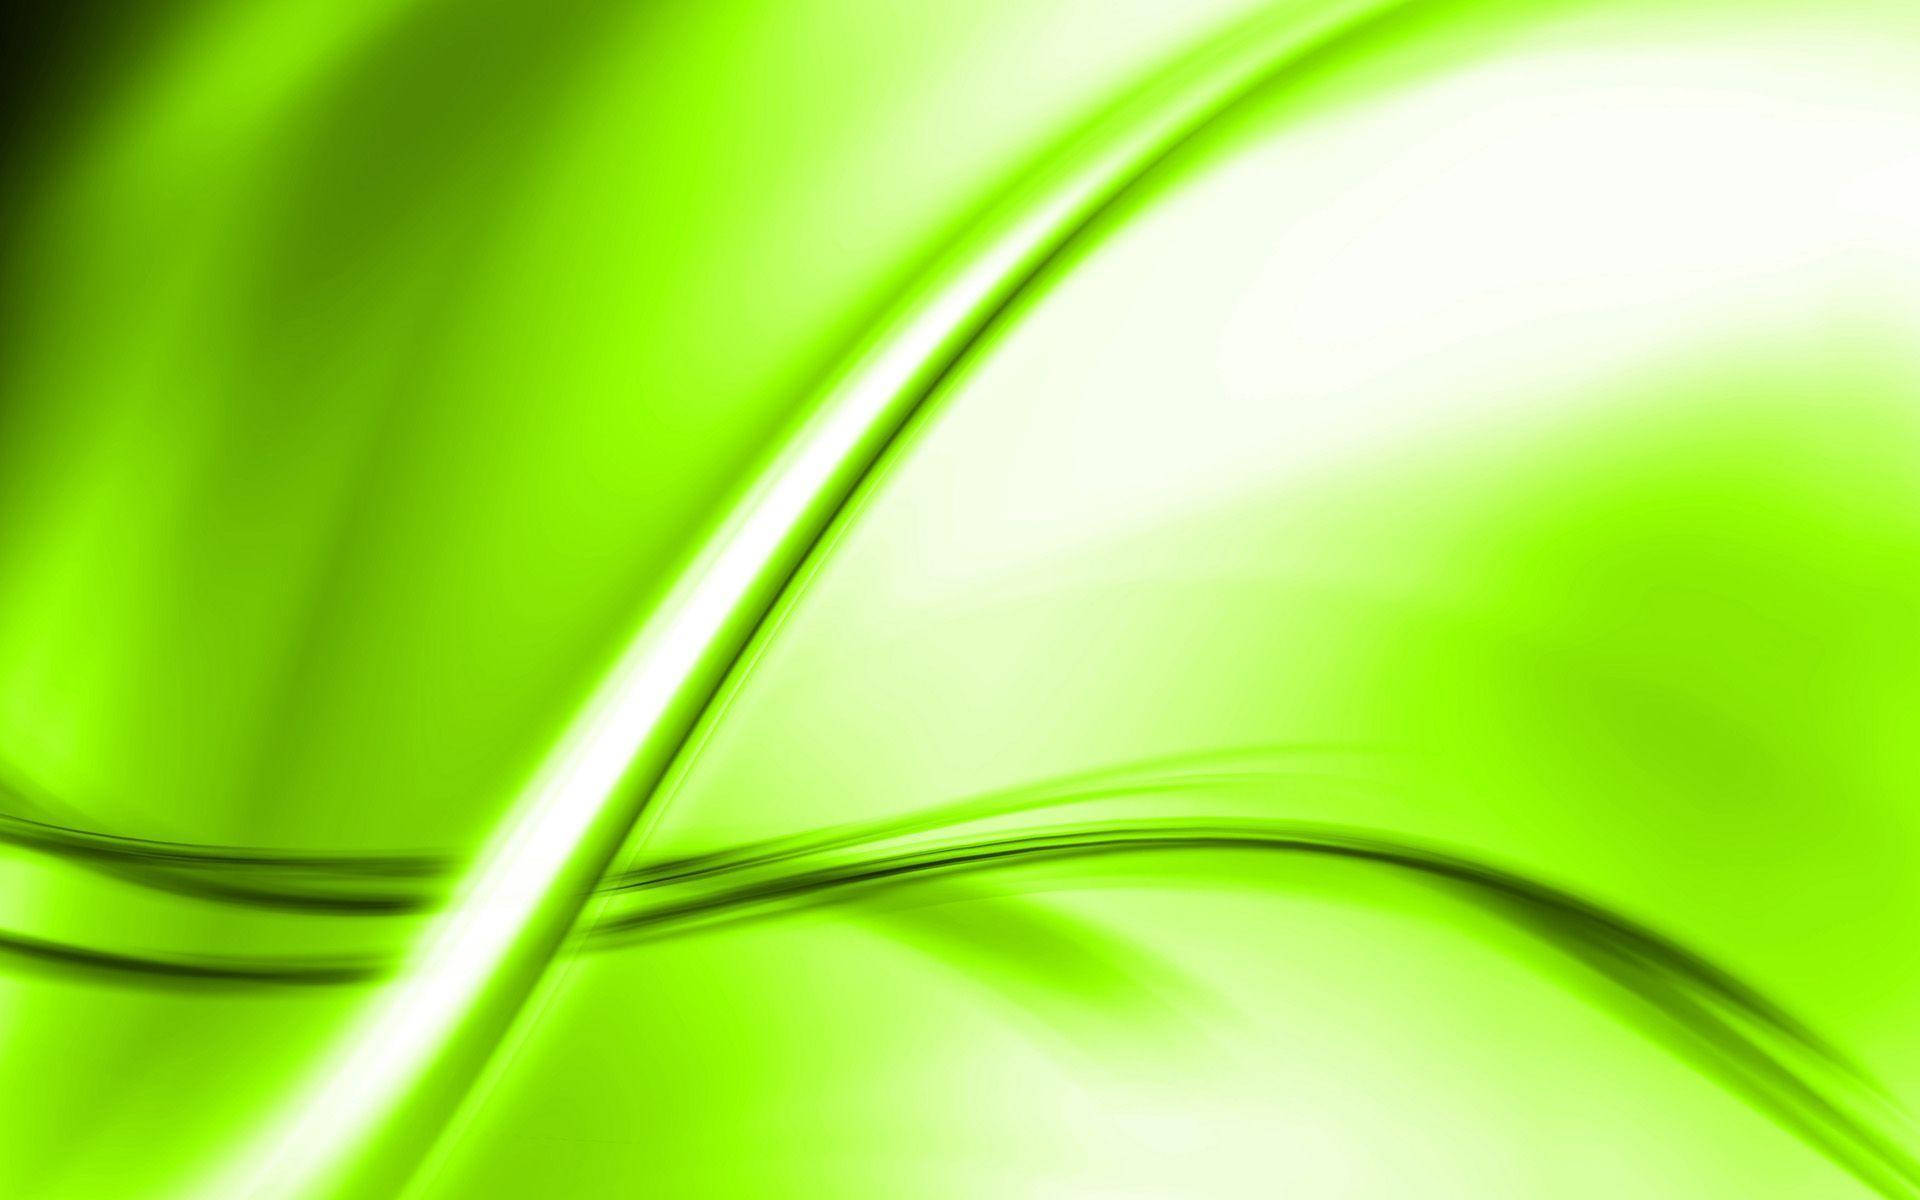 Glowing Super Light Green Abstract Background